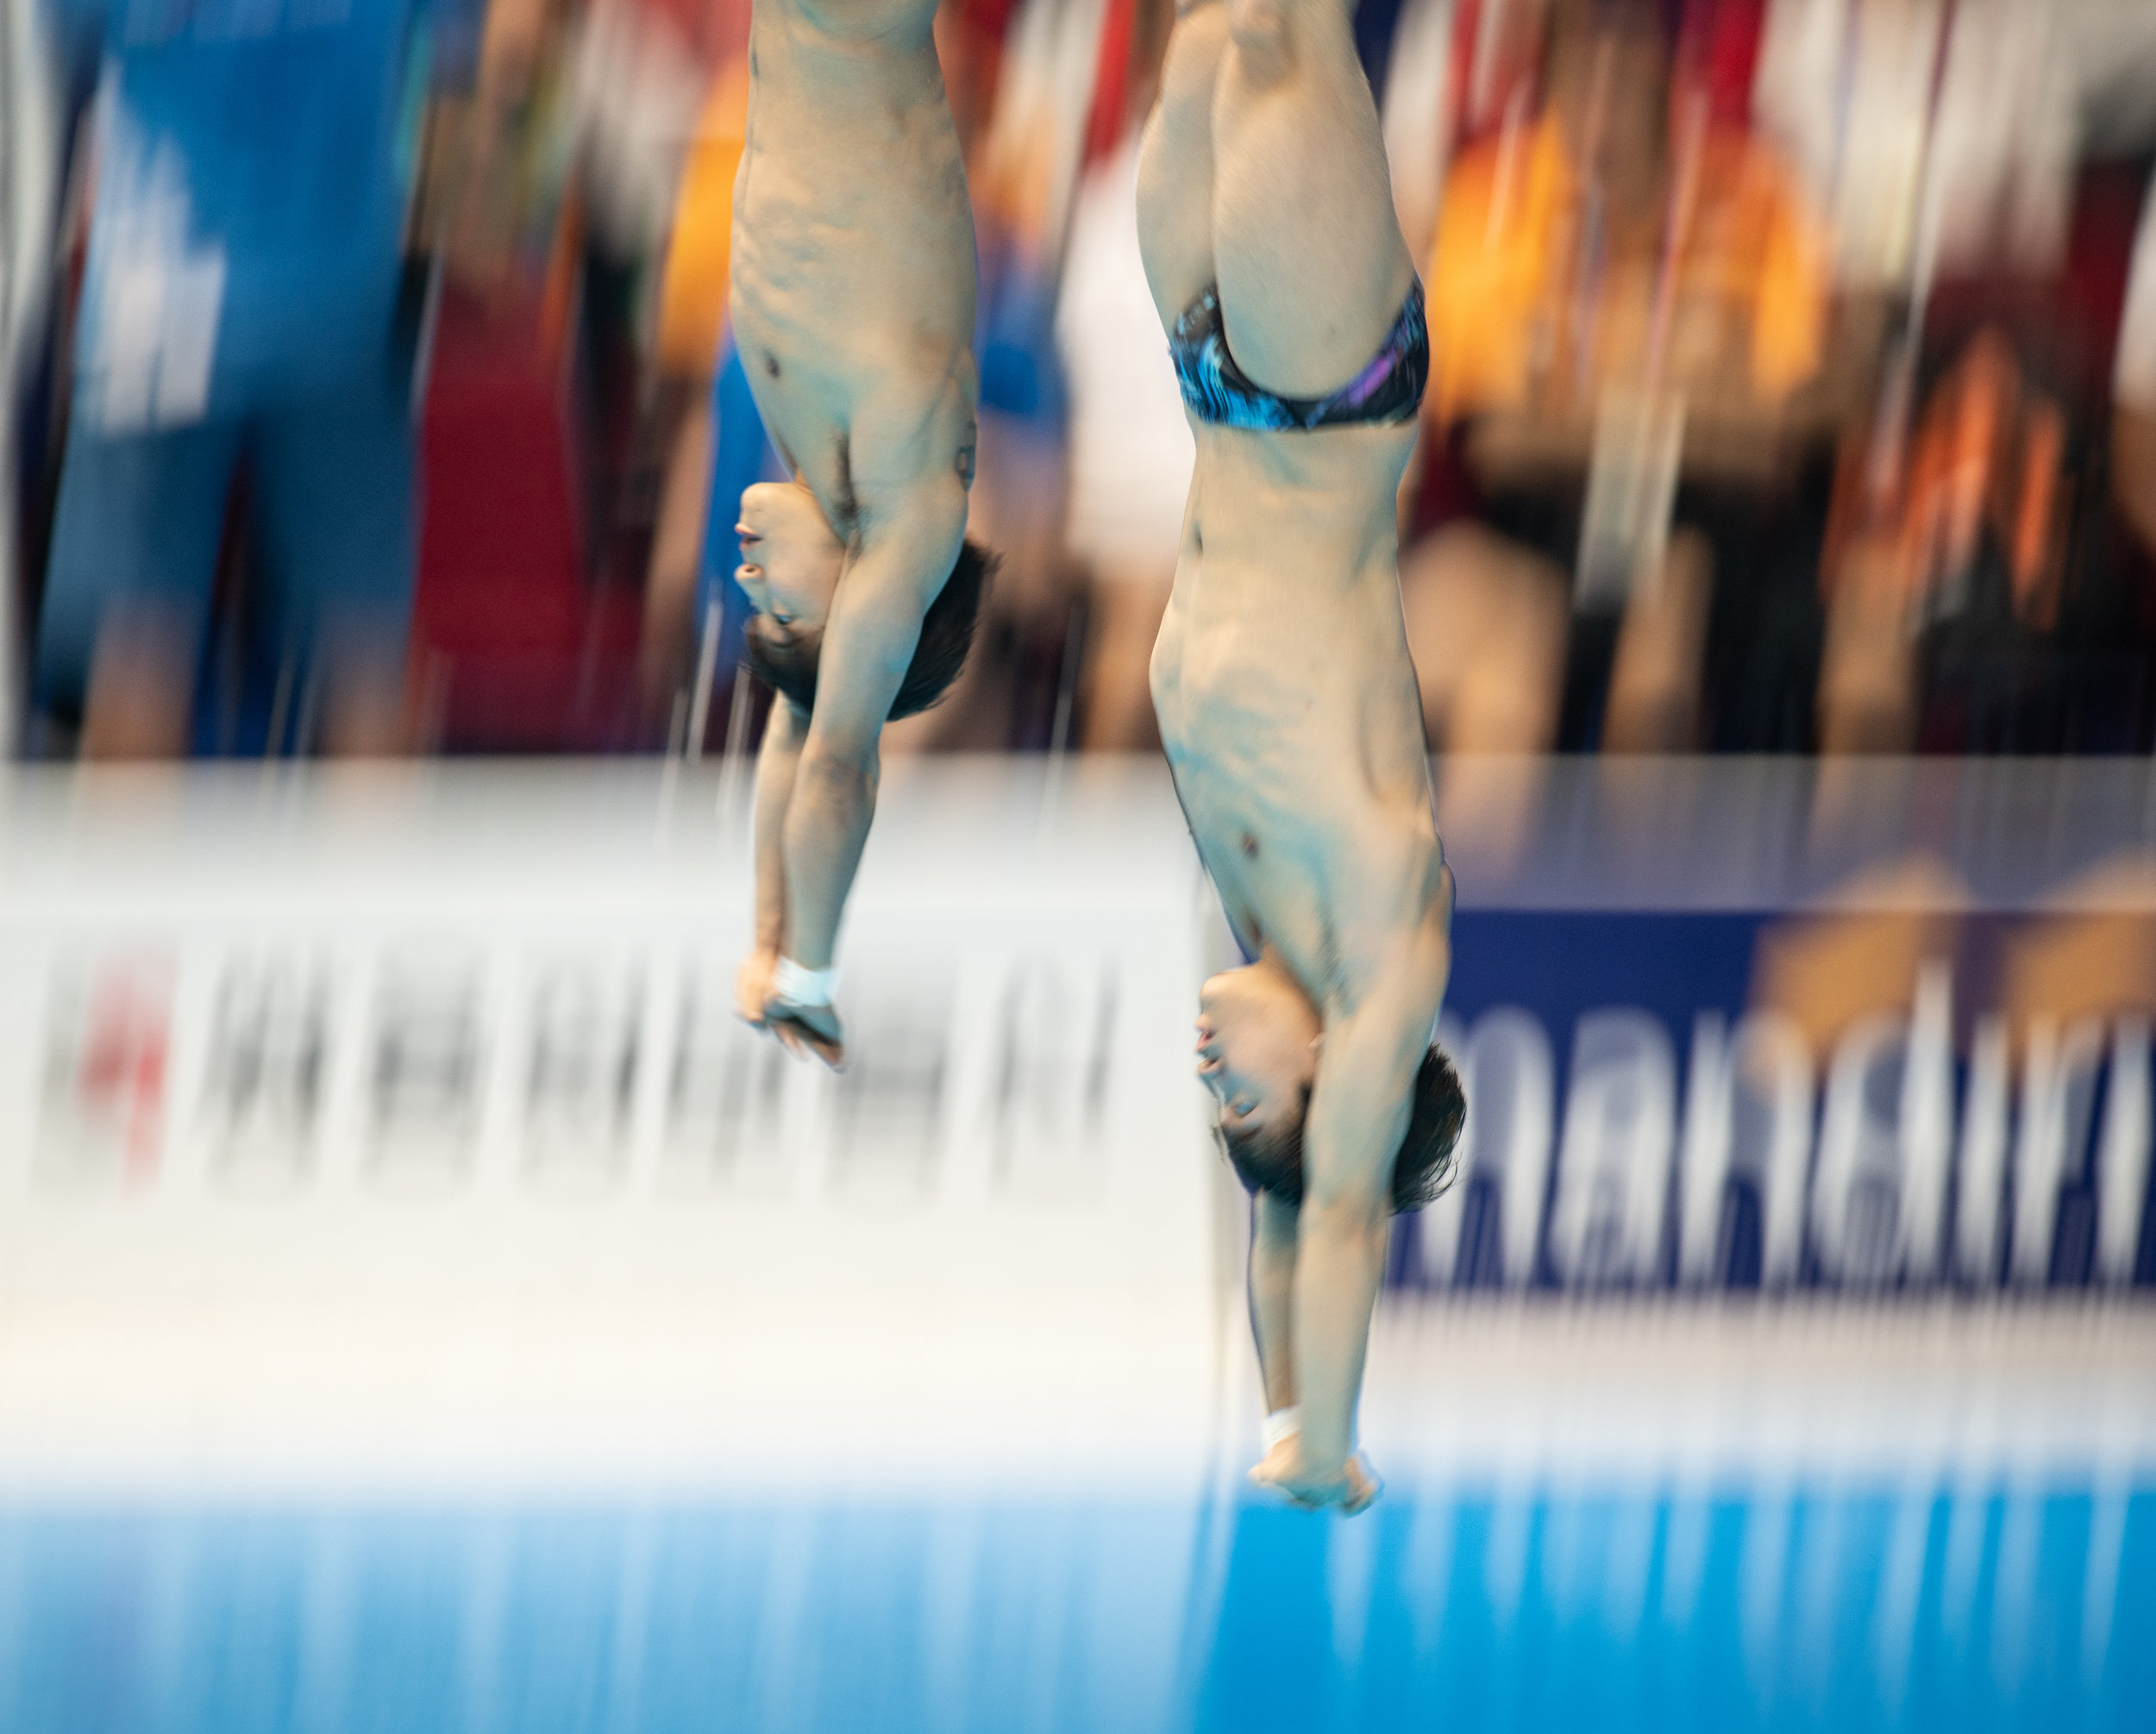 Korean divers during the 3m Synchronized Springboard Final of the Asian Games at the GBK Aquatic Centre.